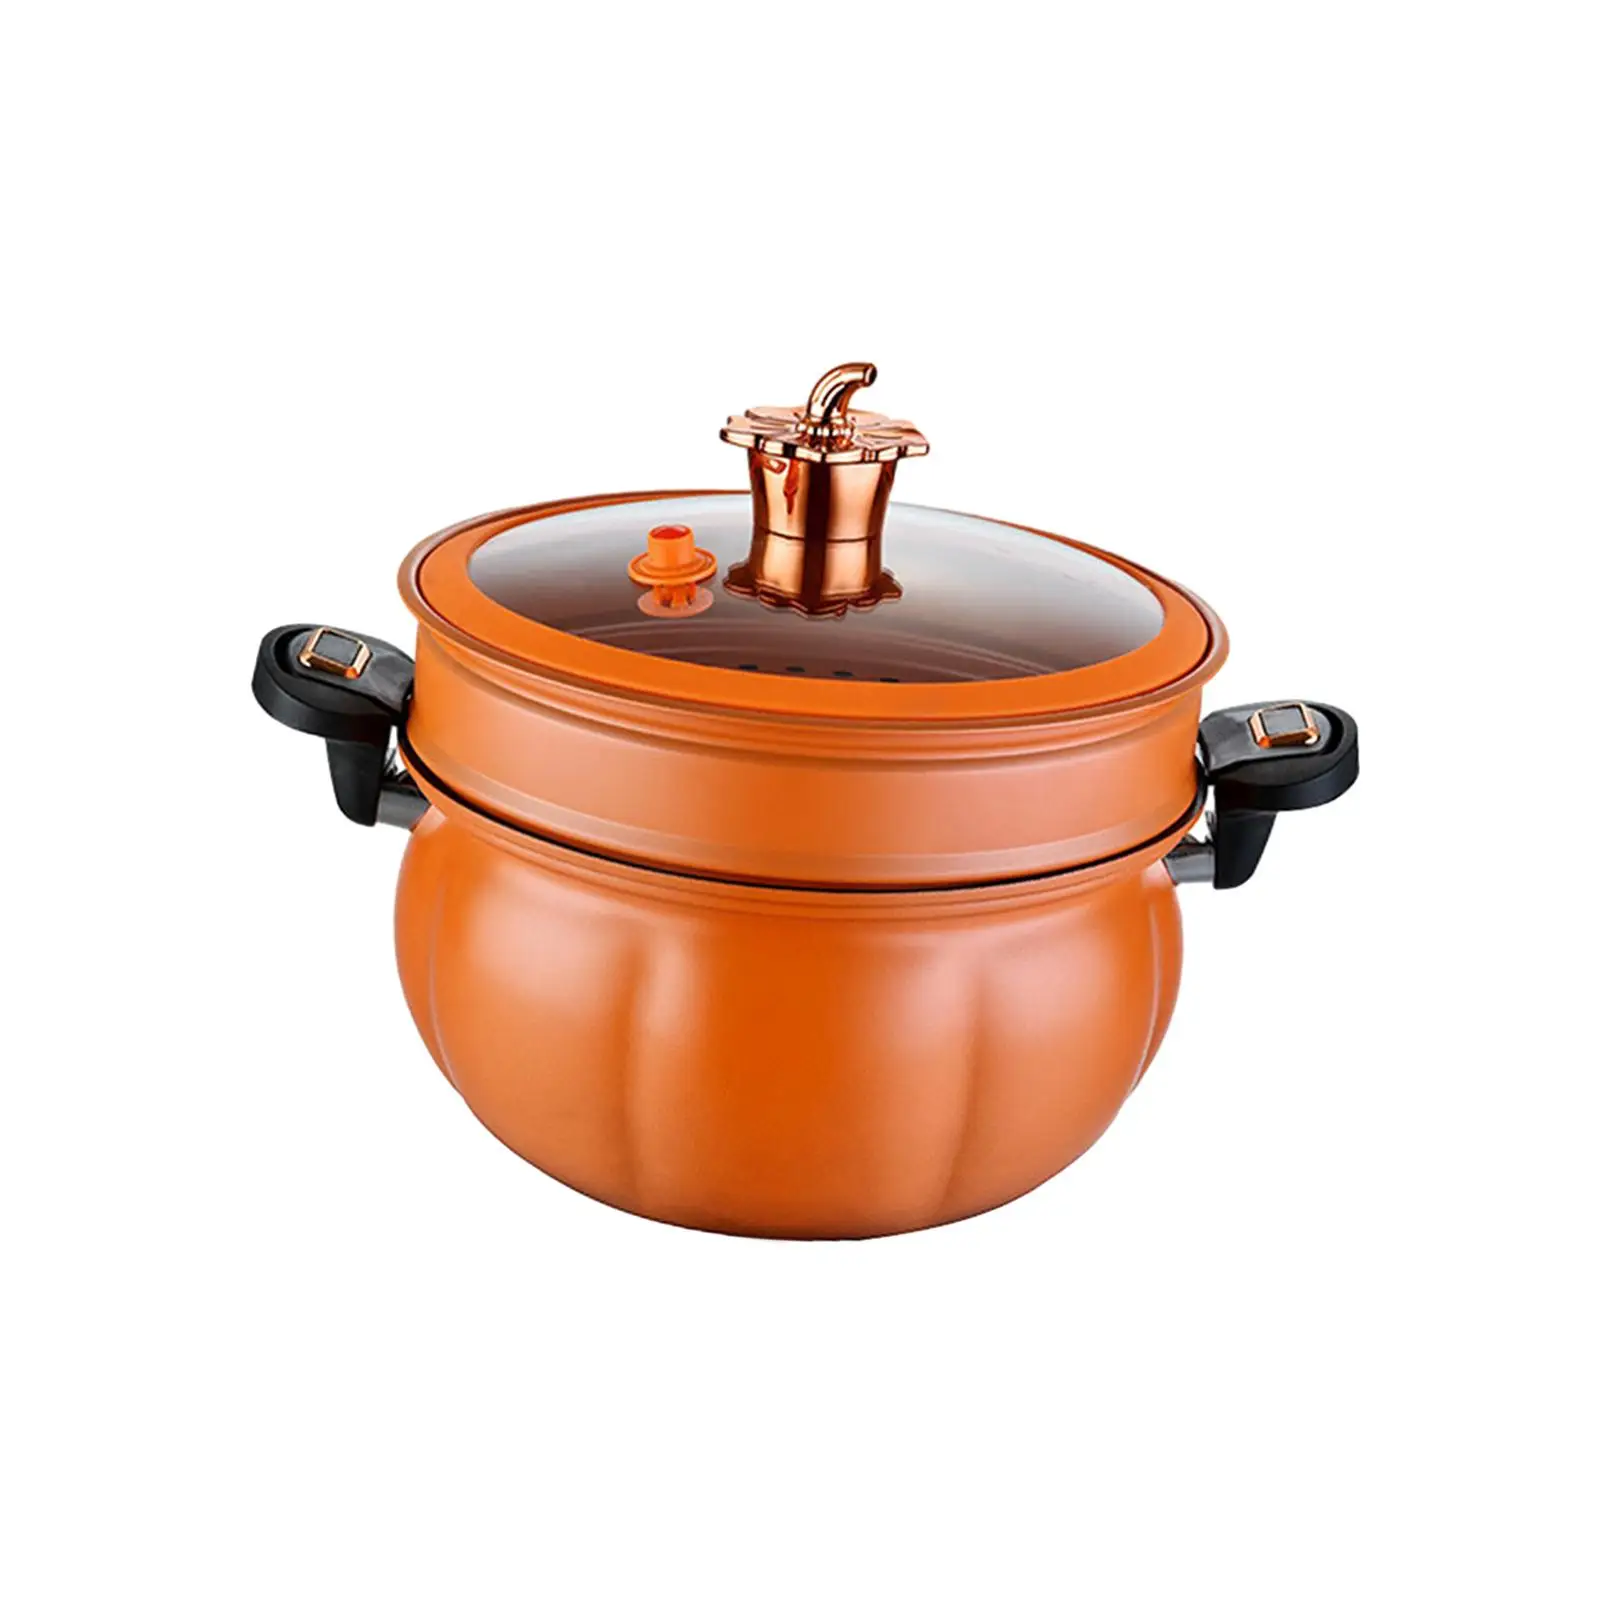 Soup Pot Pumpkin Shaped Slow Cooker Cookware with Cover Simmer Pot Sauce Pan Stew Pot for Pasta Noodle Cereals Soup Stewing Milk